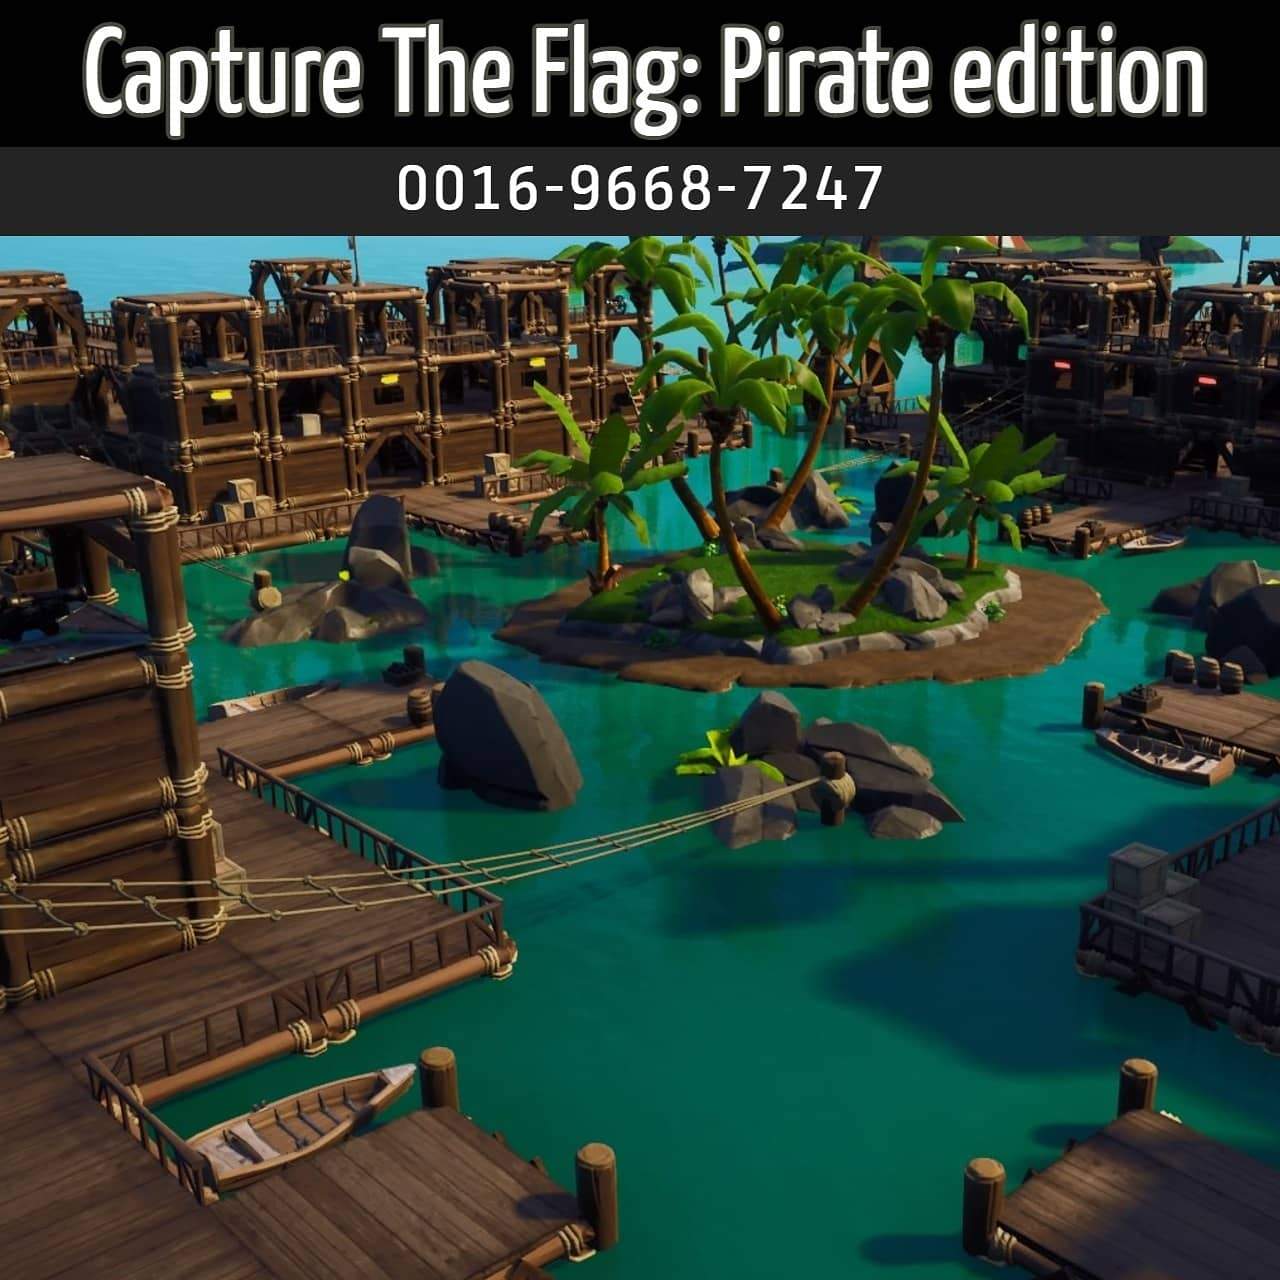 CAPTURE THE FLAG: PIRATE EDITION